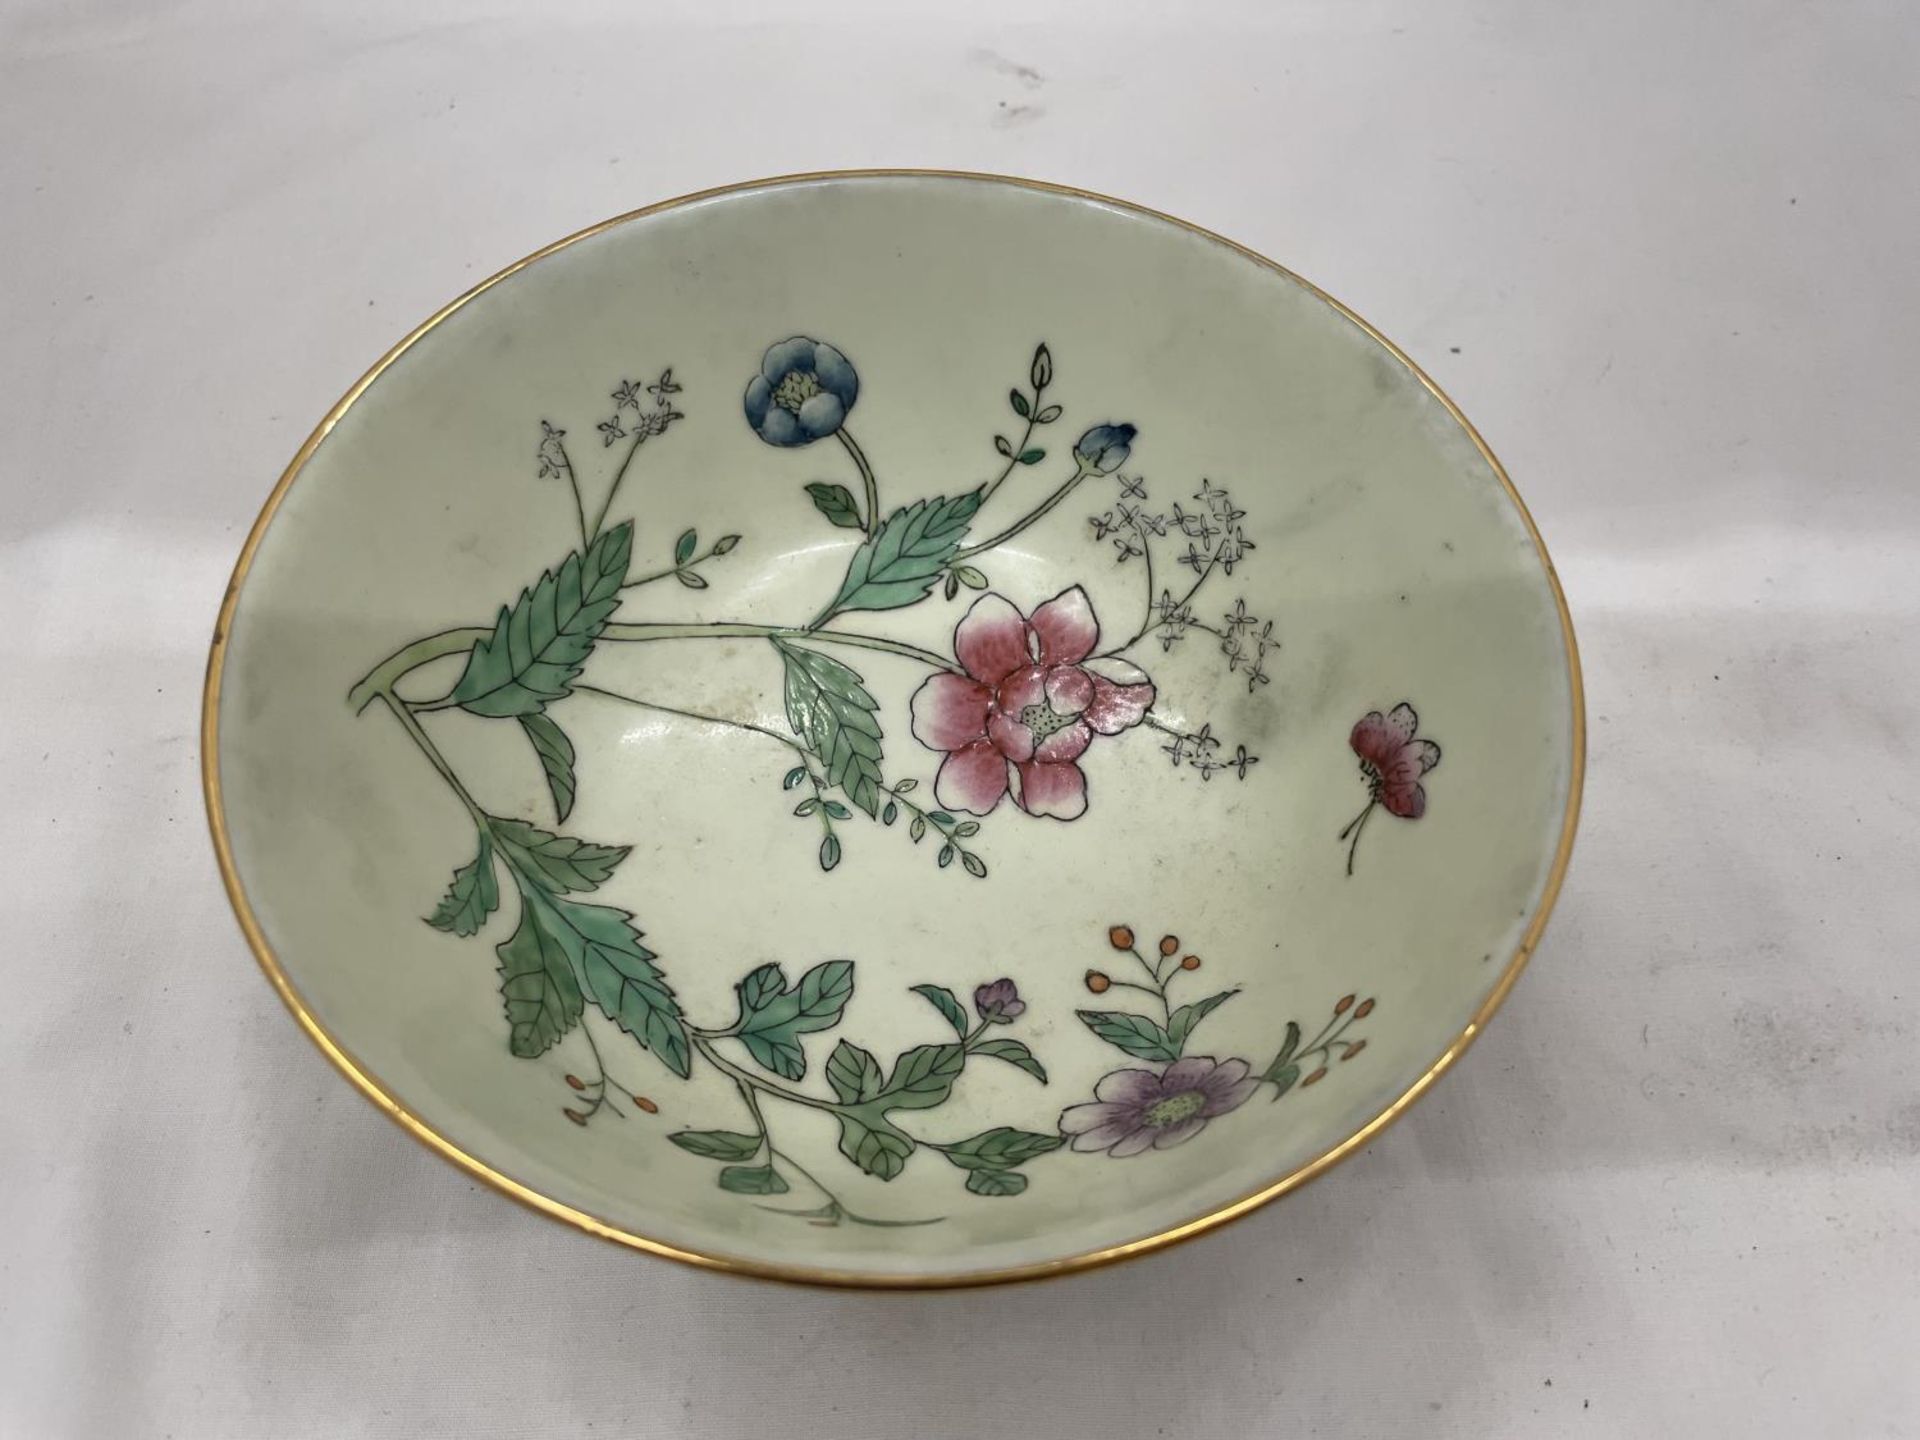 A VINTAGE CHINOISERIE HANDPAINTED BOWL - Image 2 of 3